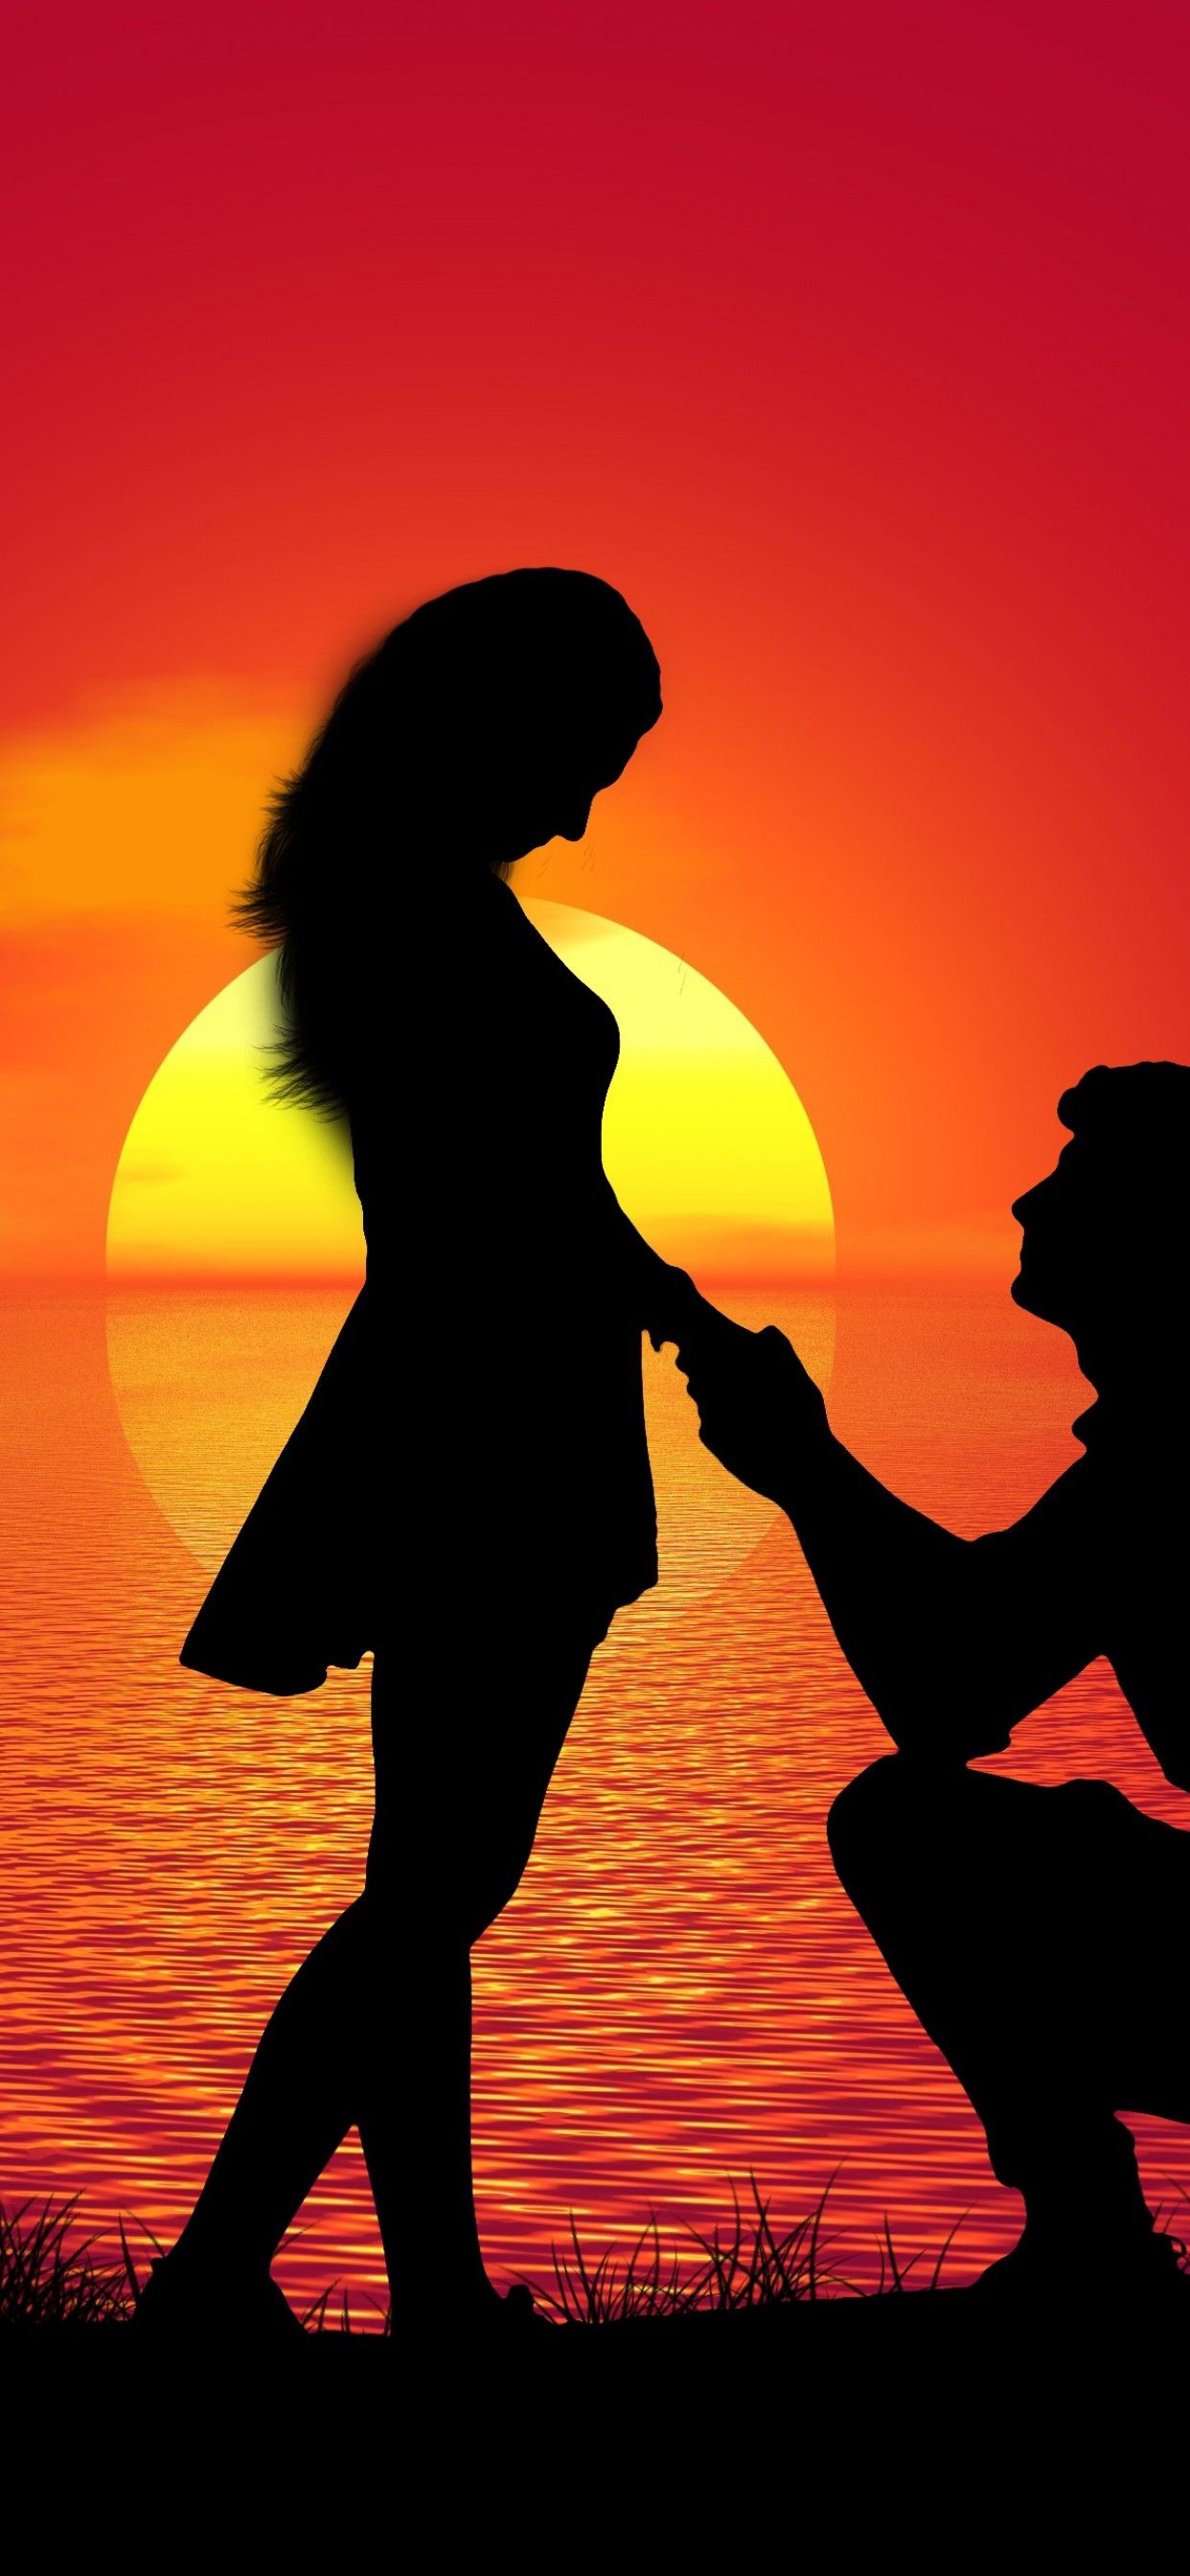 Couple 4K Wallpaper, Sunset, Proposal, Silhouette, Romantic, Lovers, Together, Love